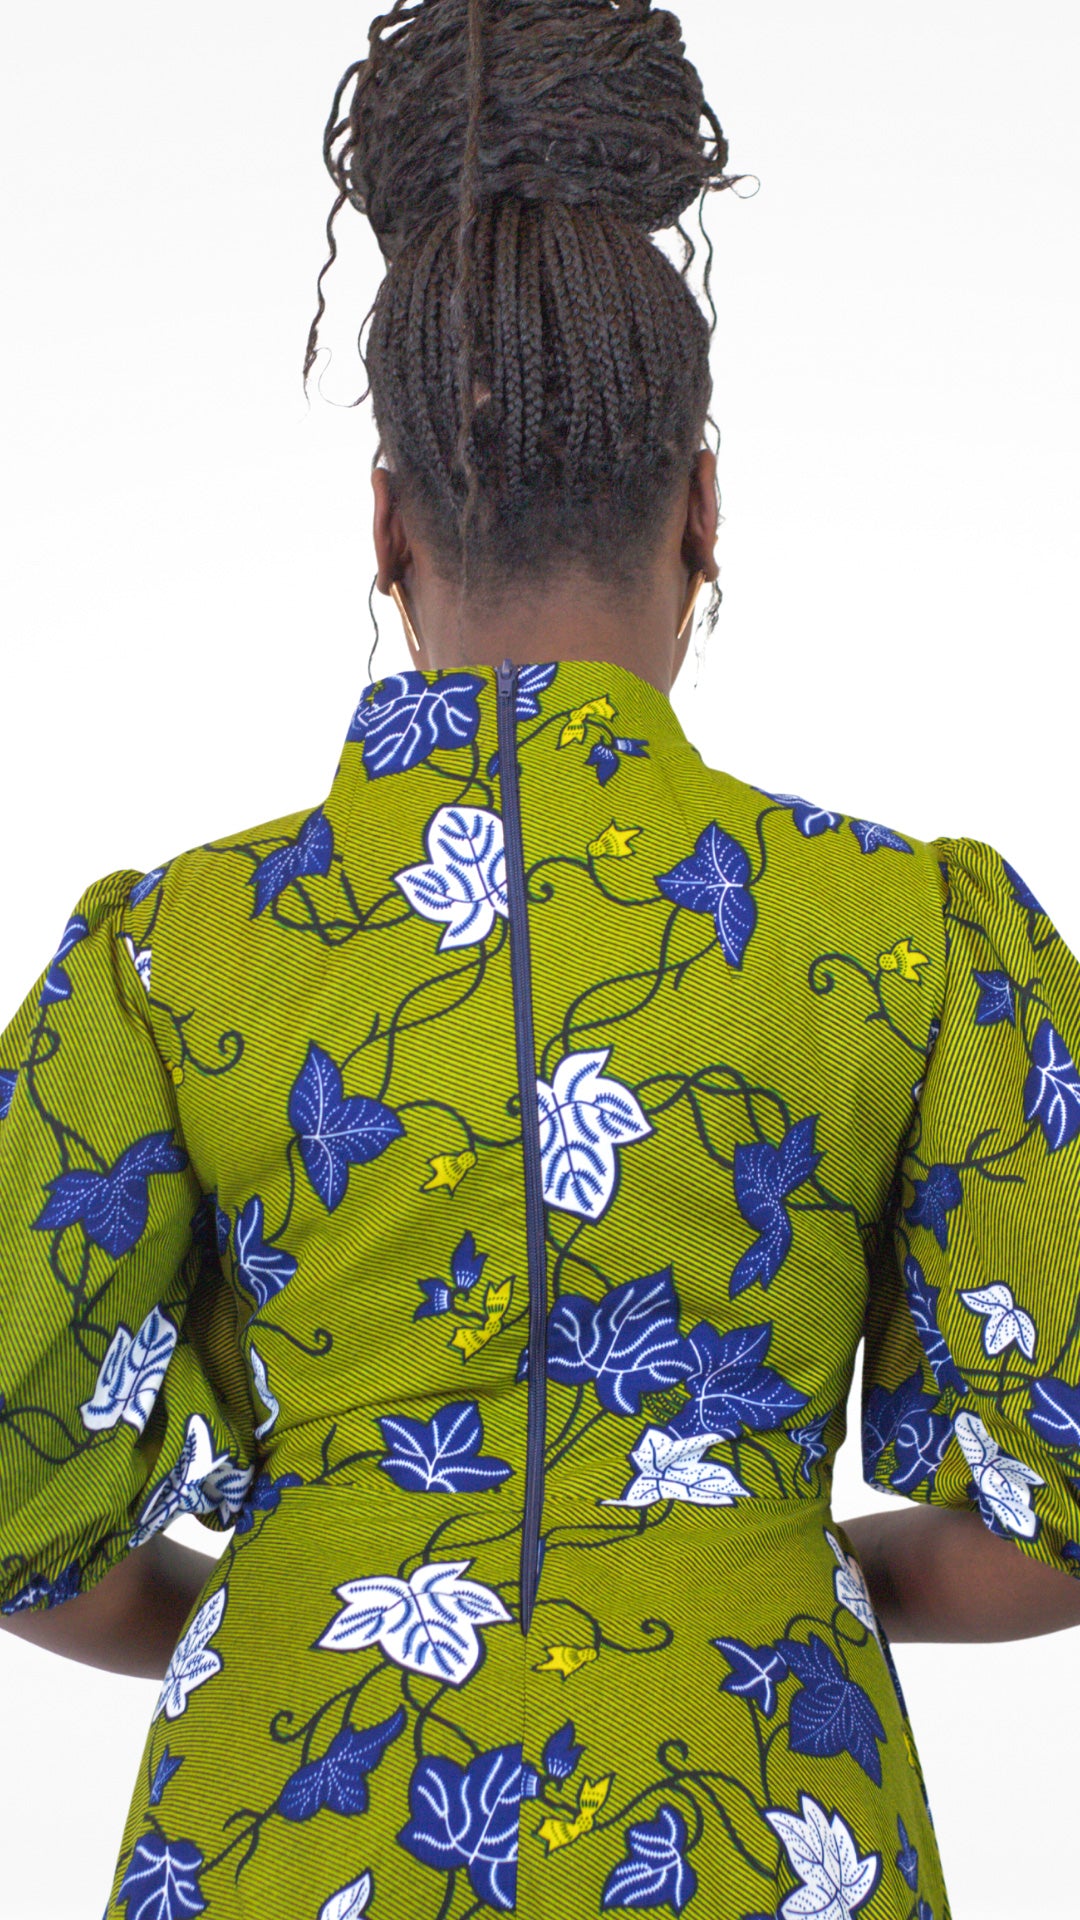 A rear view of the khaki dress, showcasing the zipper closure at the back and the enchanting blue and white leaves patterns.